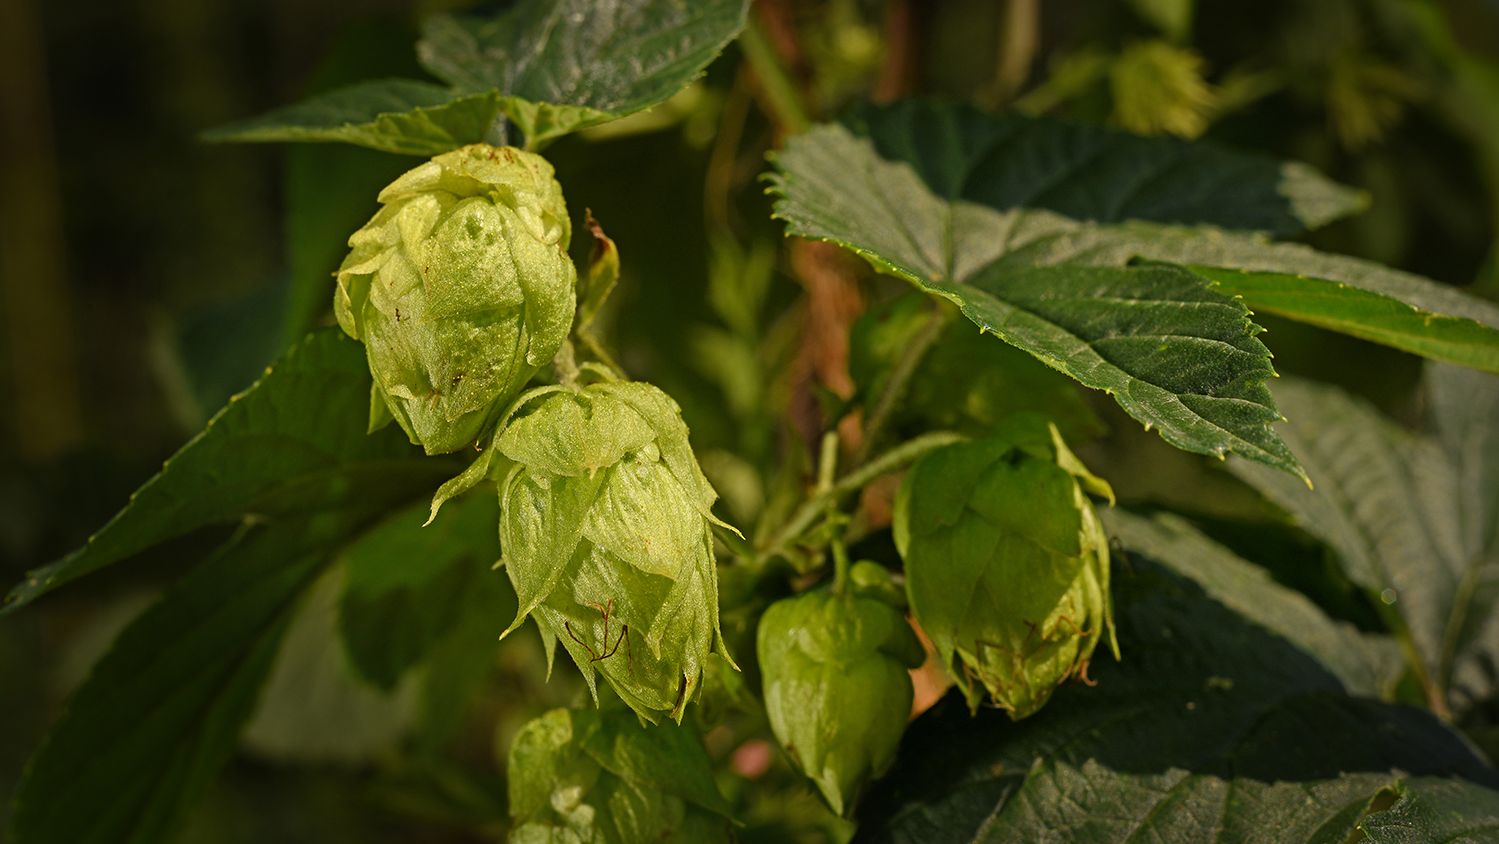 Close up image of hops flowers